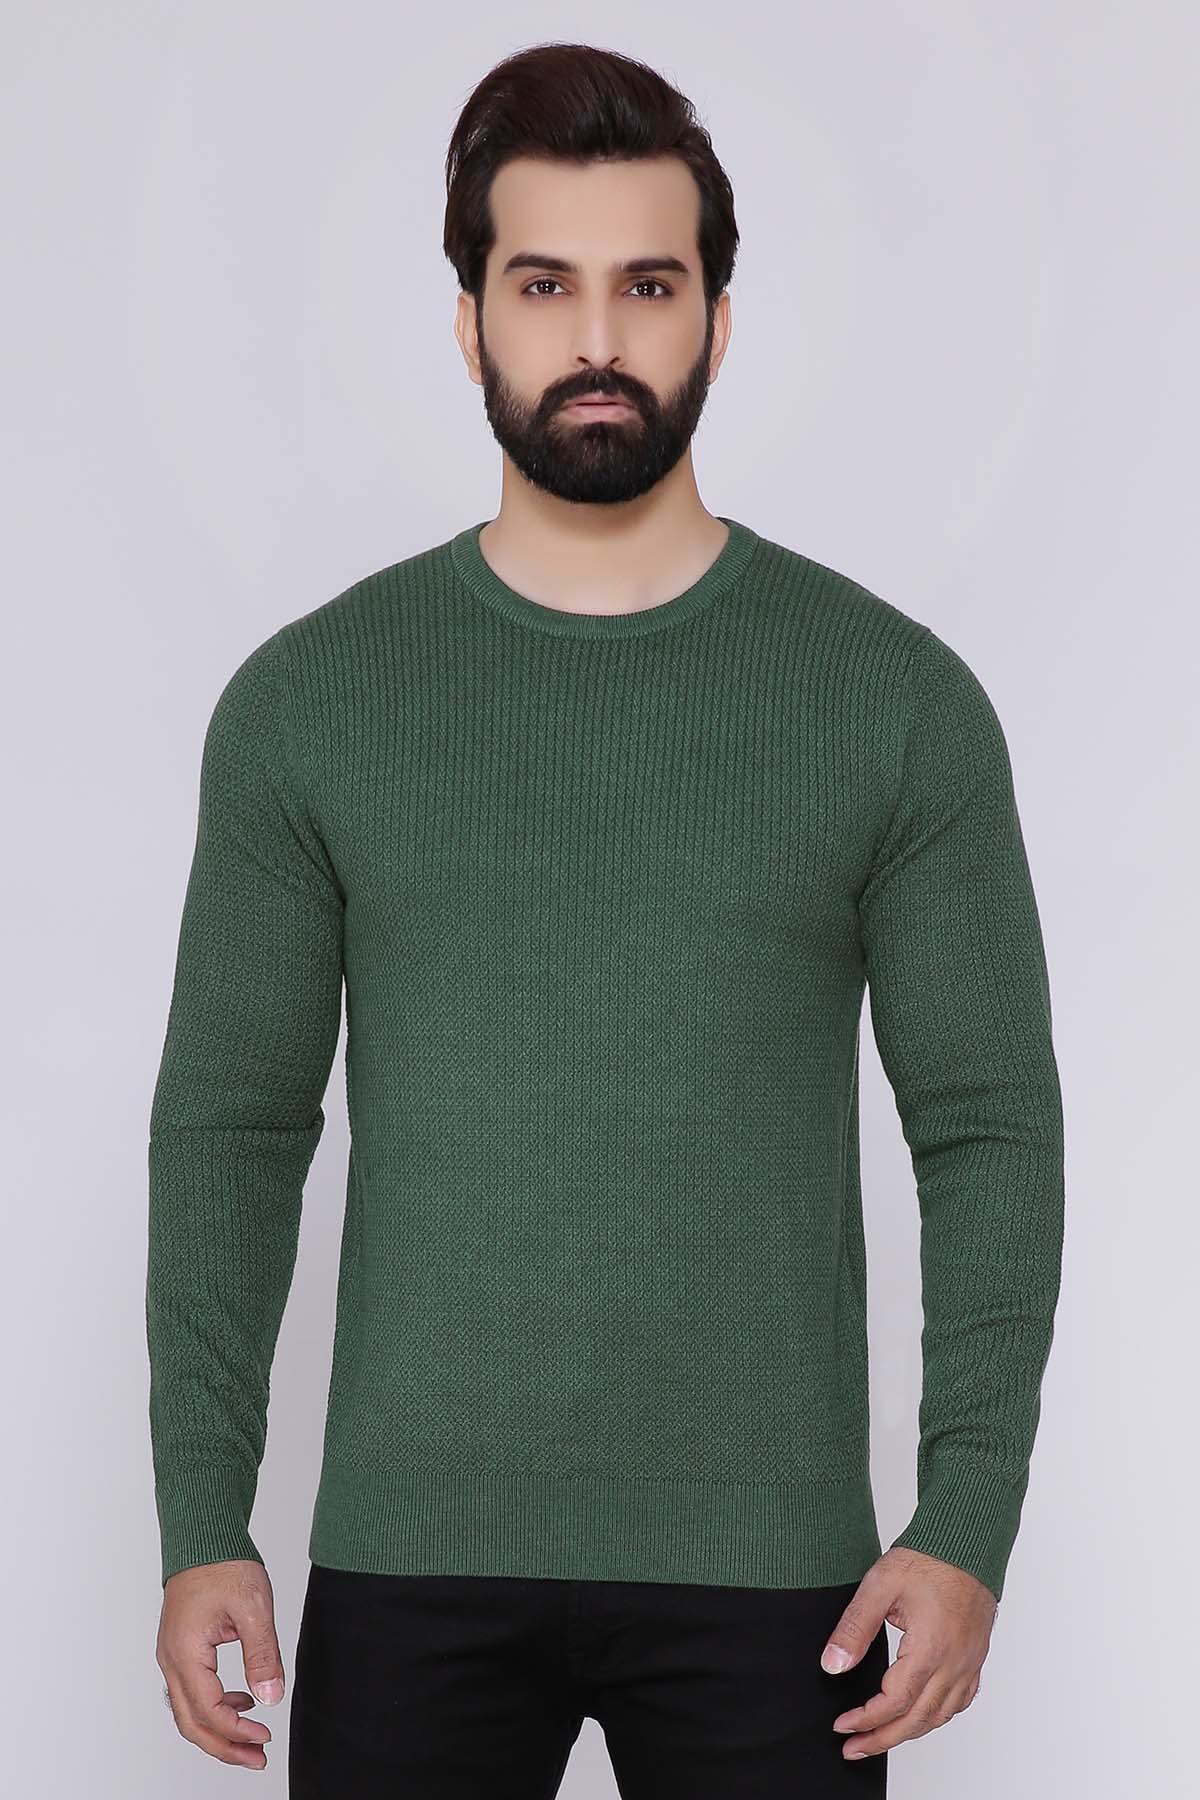 SWEATER ROUND NECK FULL SLEEVE GREEN at Charcoal Clothing